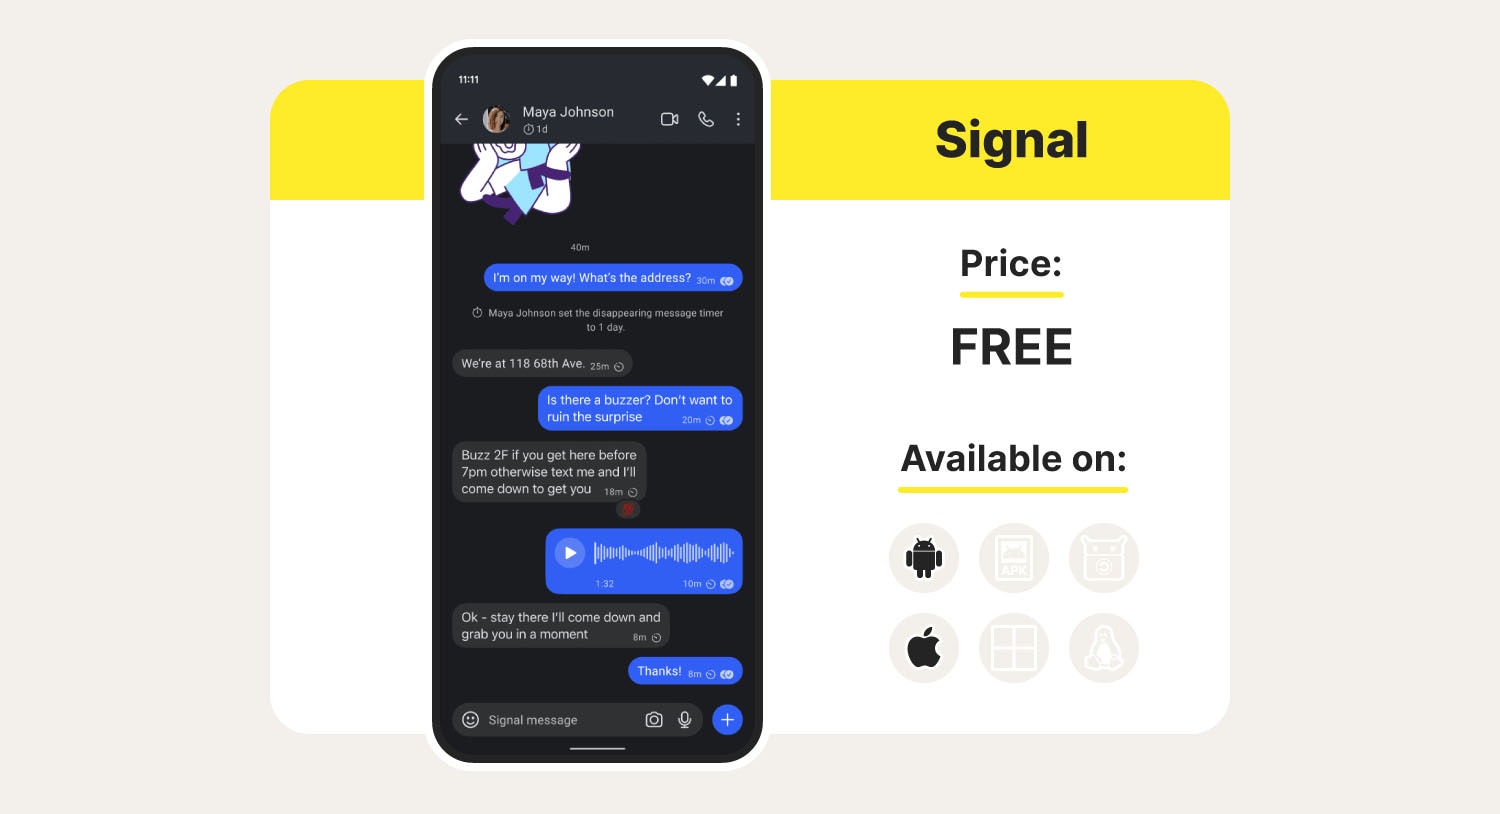 Screenshot showing a conversation between users on the Signal app. 